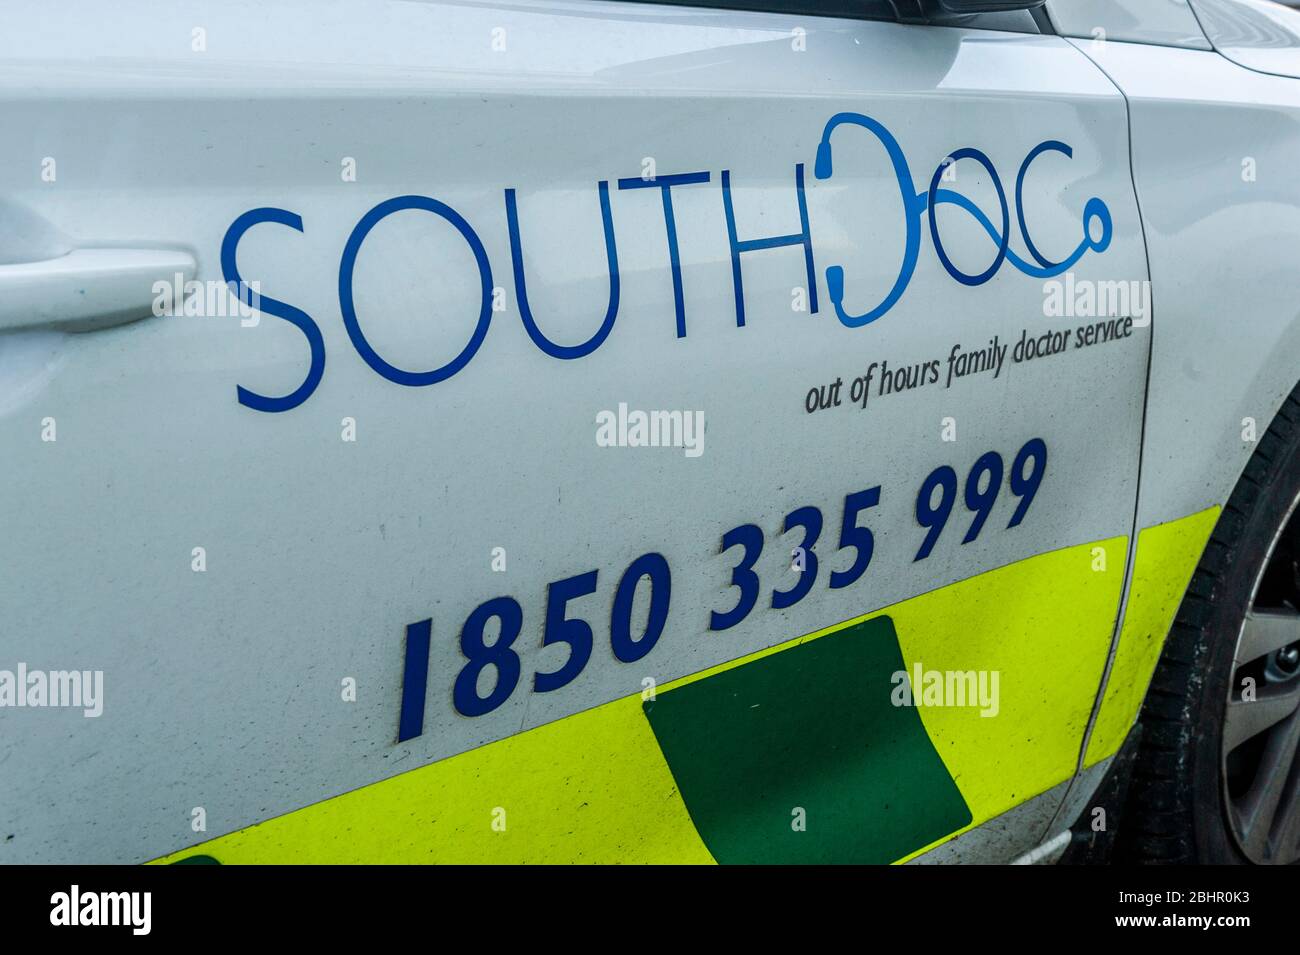 South Doc out of hours emergency vehicle in Ireland Stock Photo